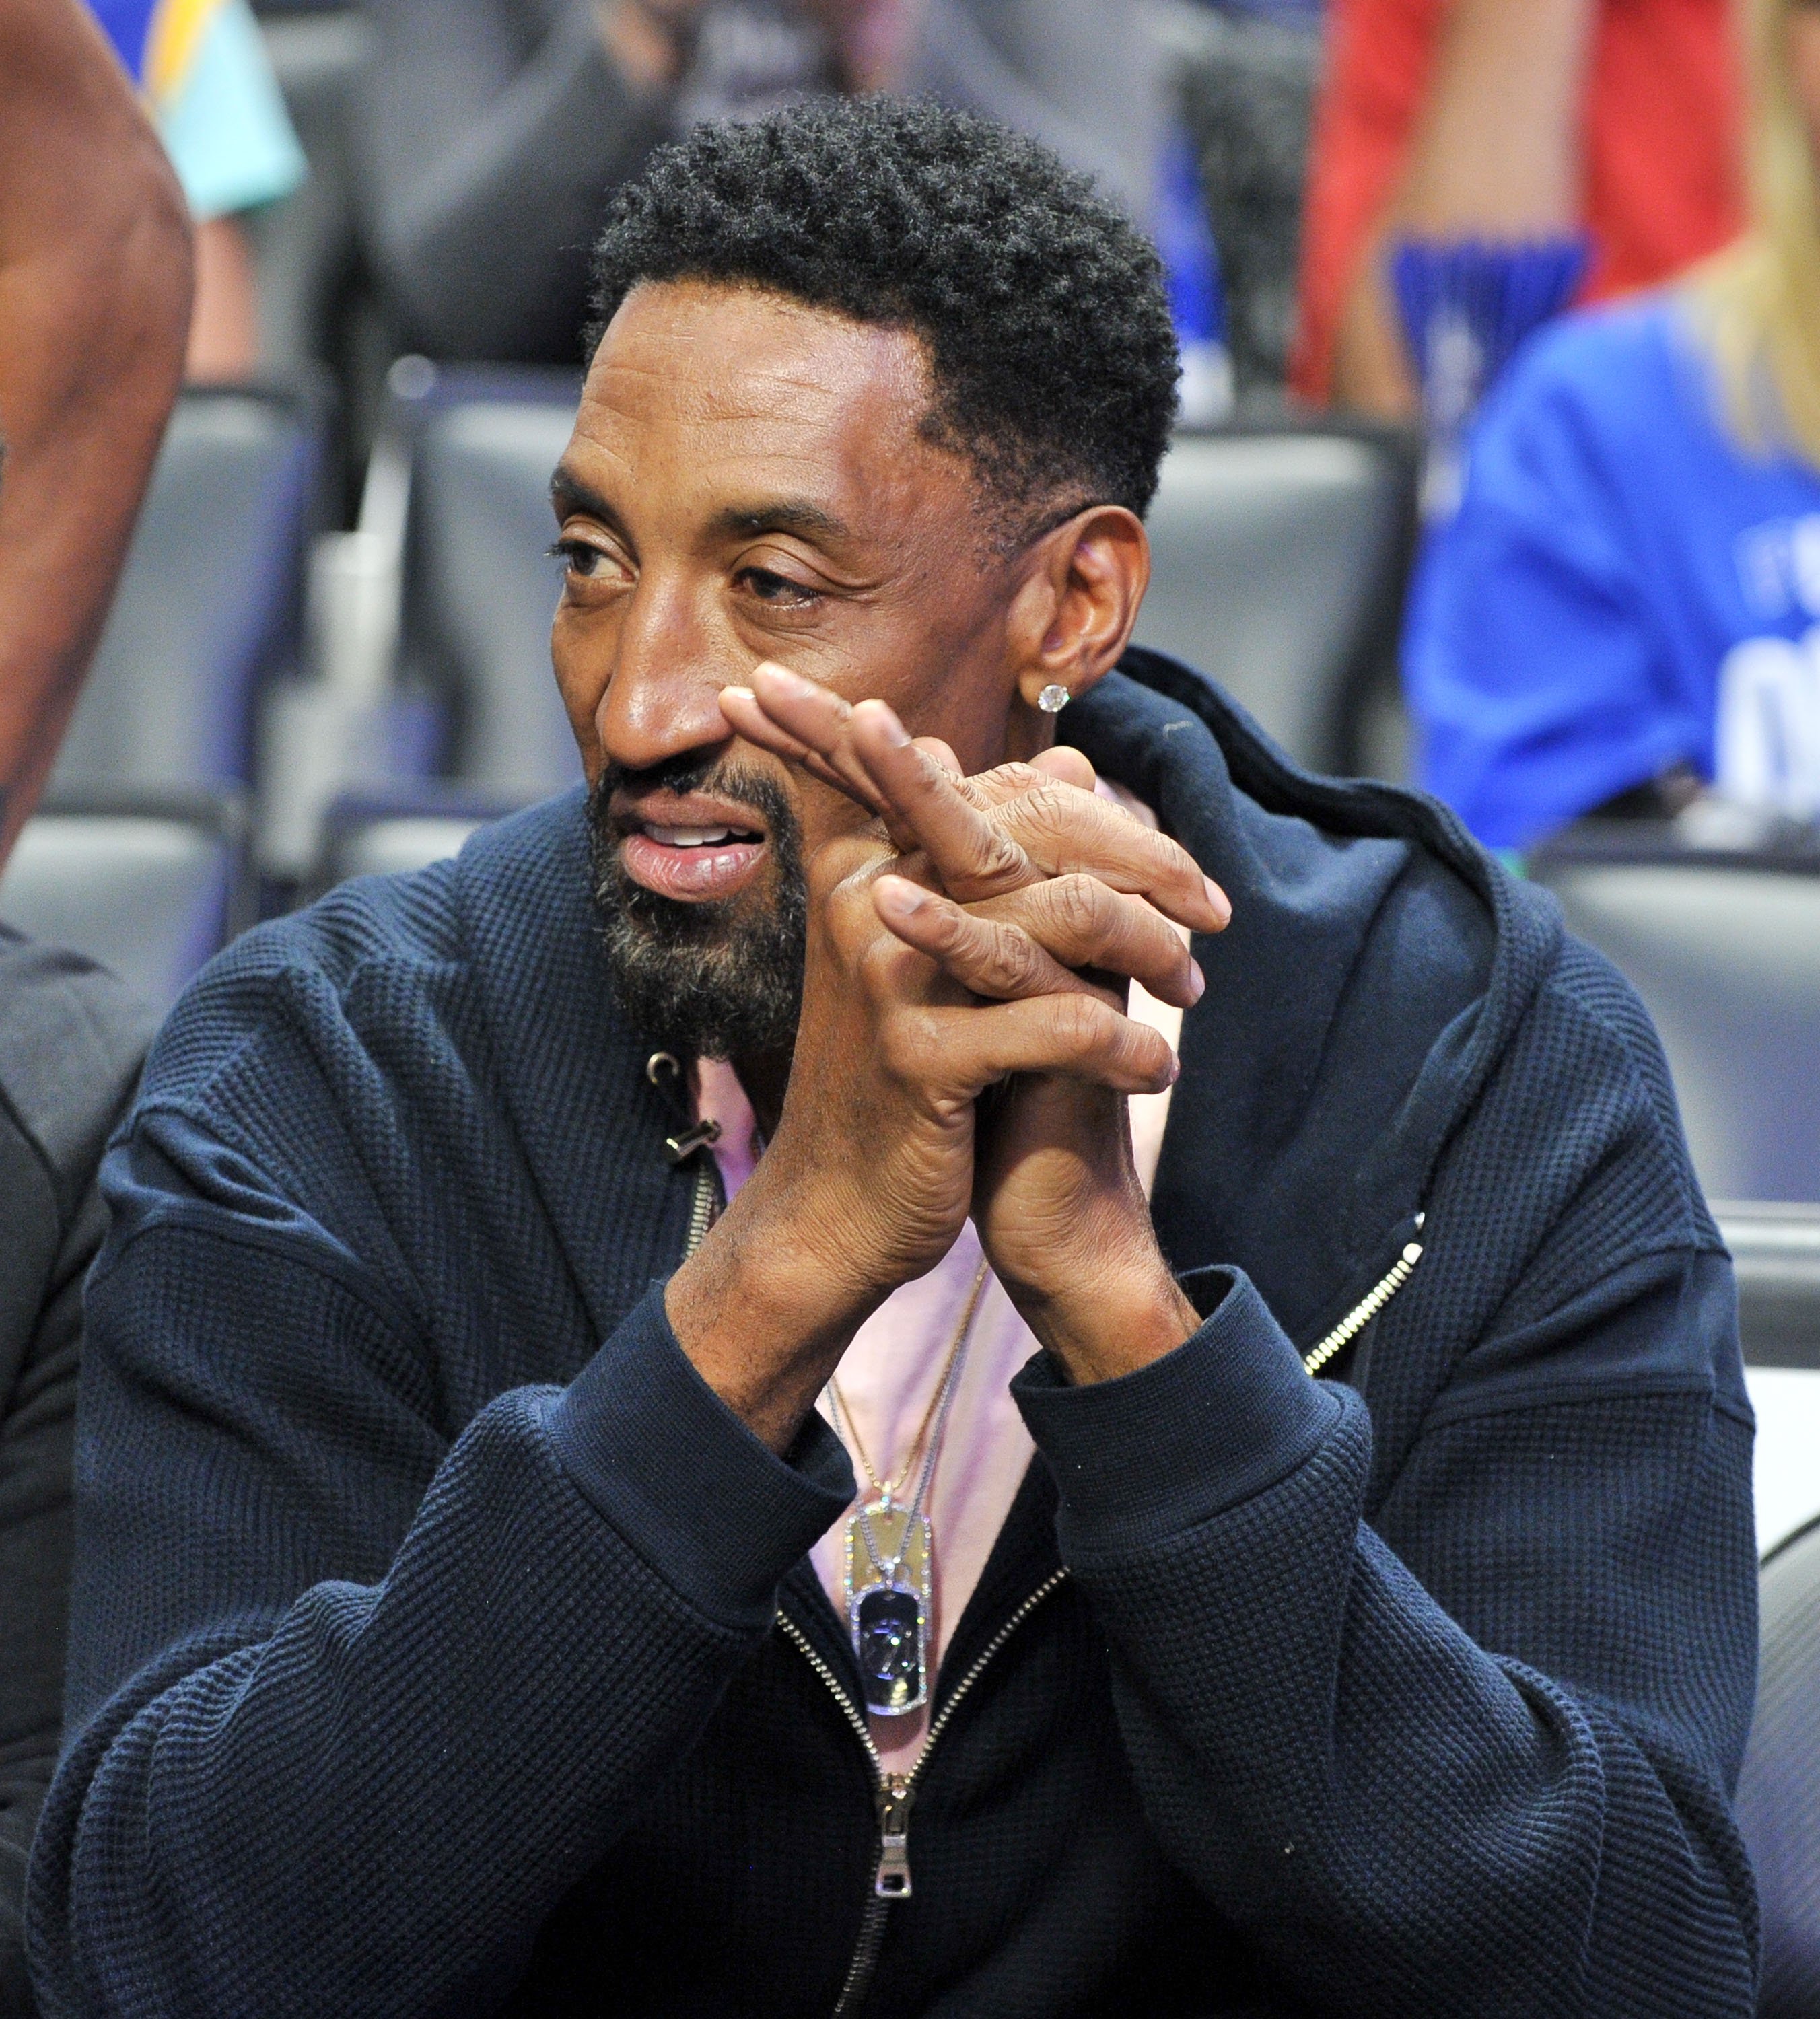 Scottie Pippen attends an NBA playoffs basketball game between the Los Angeles Clippers and the Golden State Warriors at Staples Center on April 18, 2019 | Photo: GettyImages